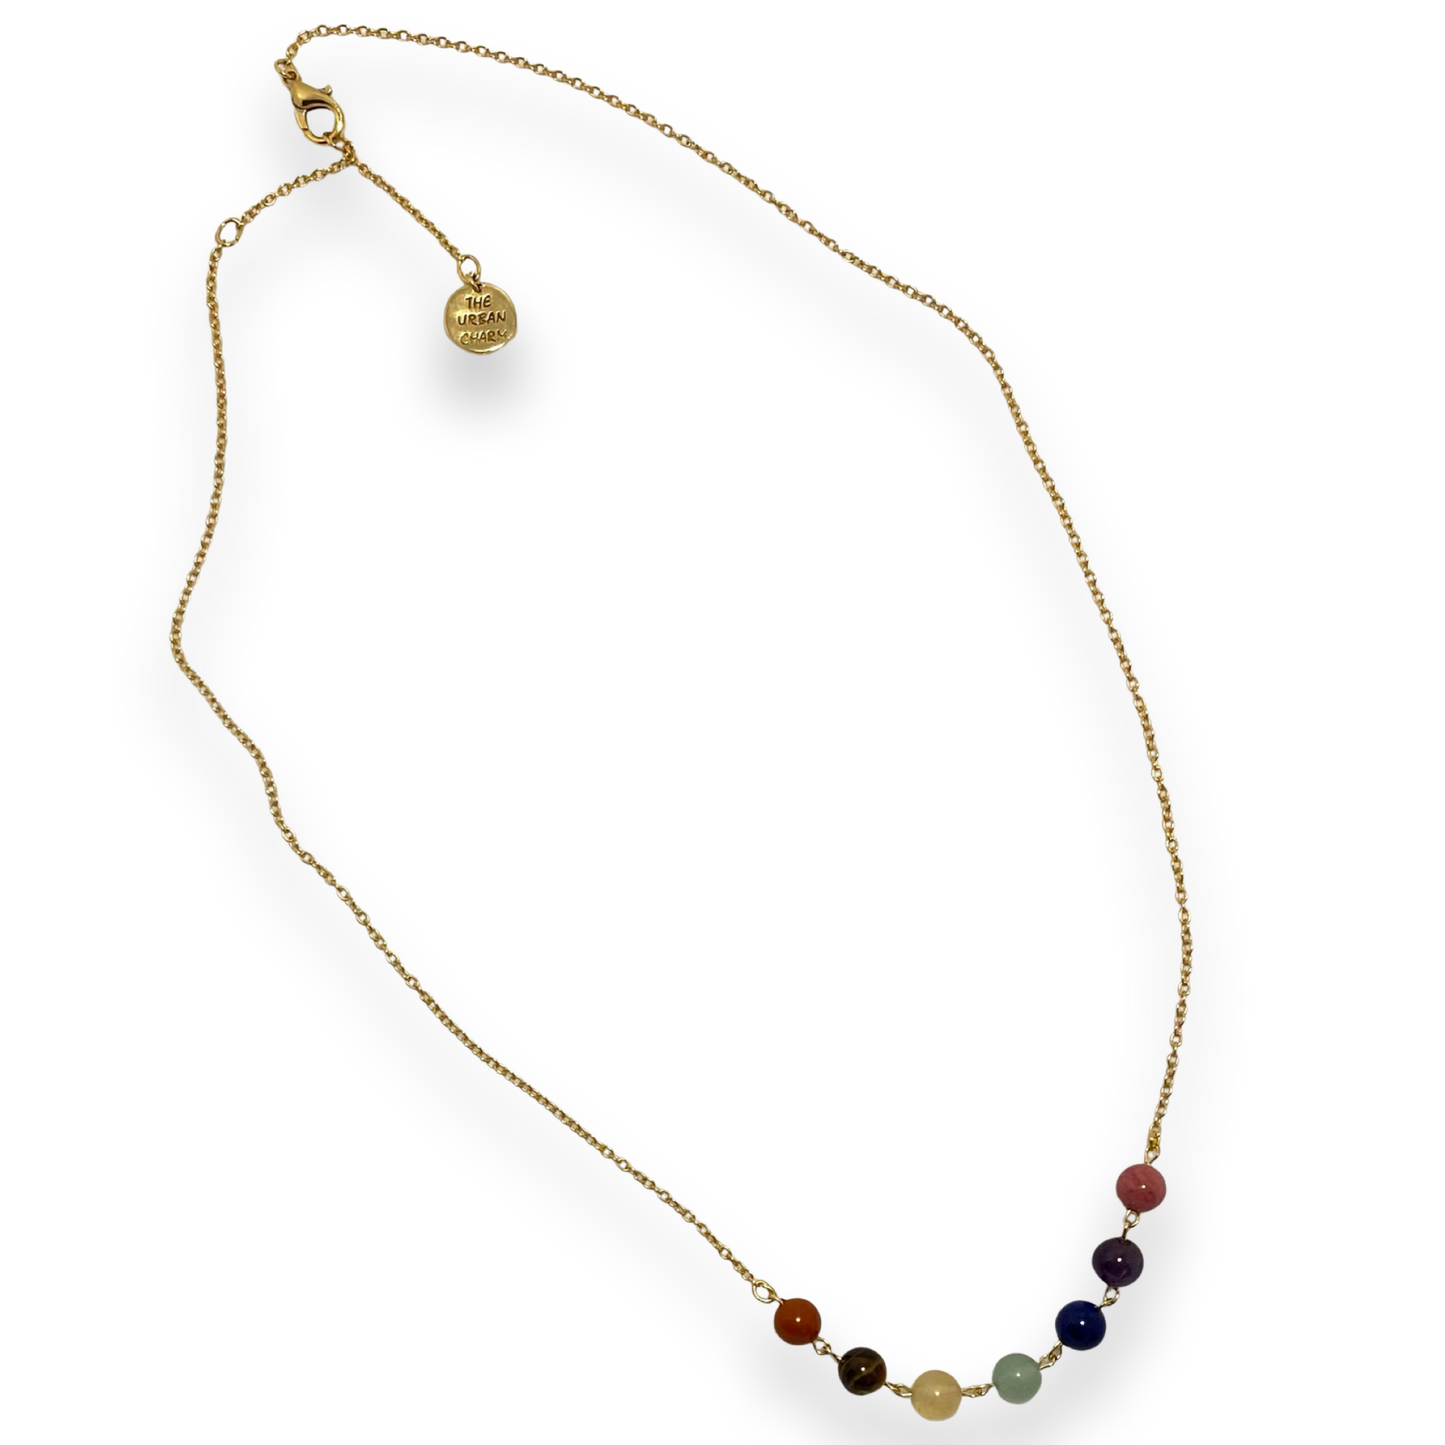 Chakra Necklace by The Urban Charm